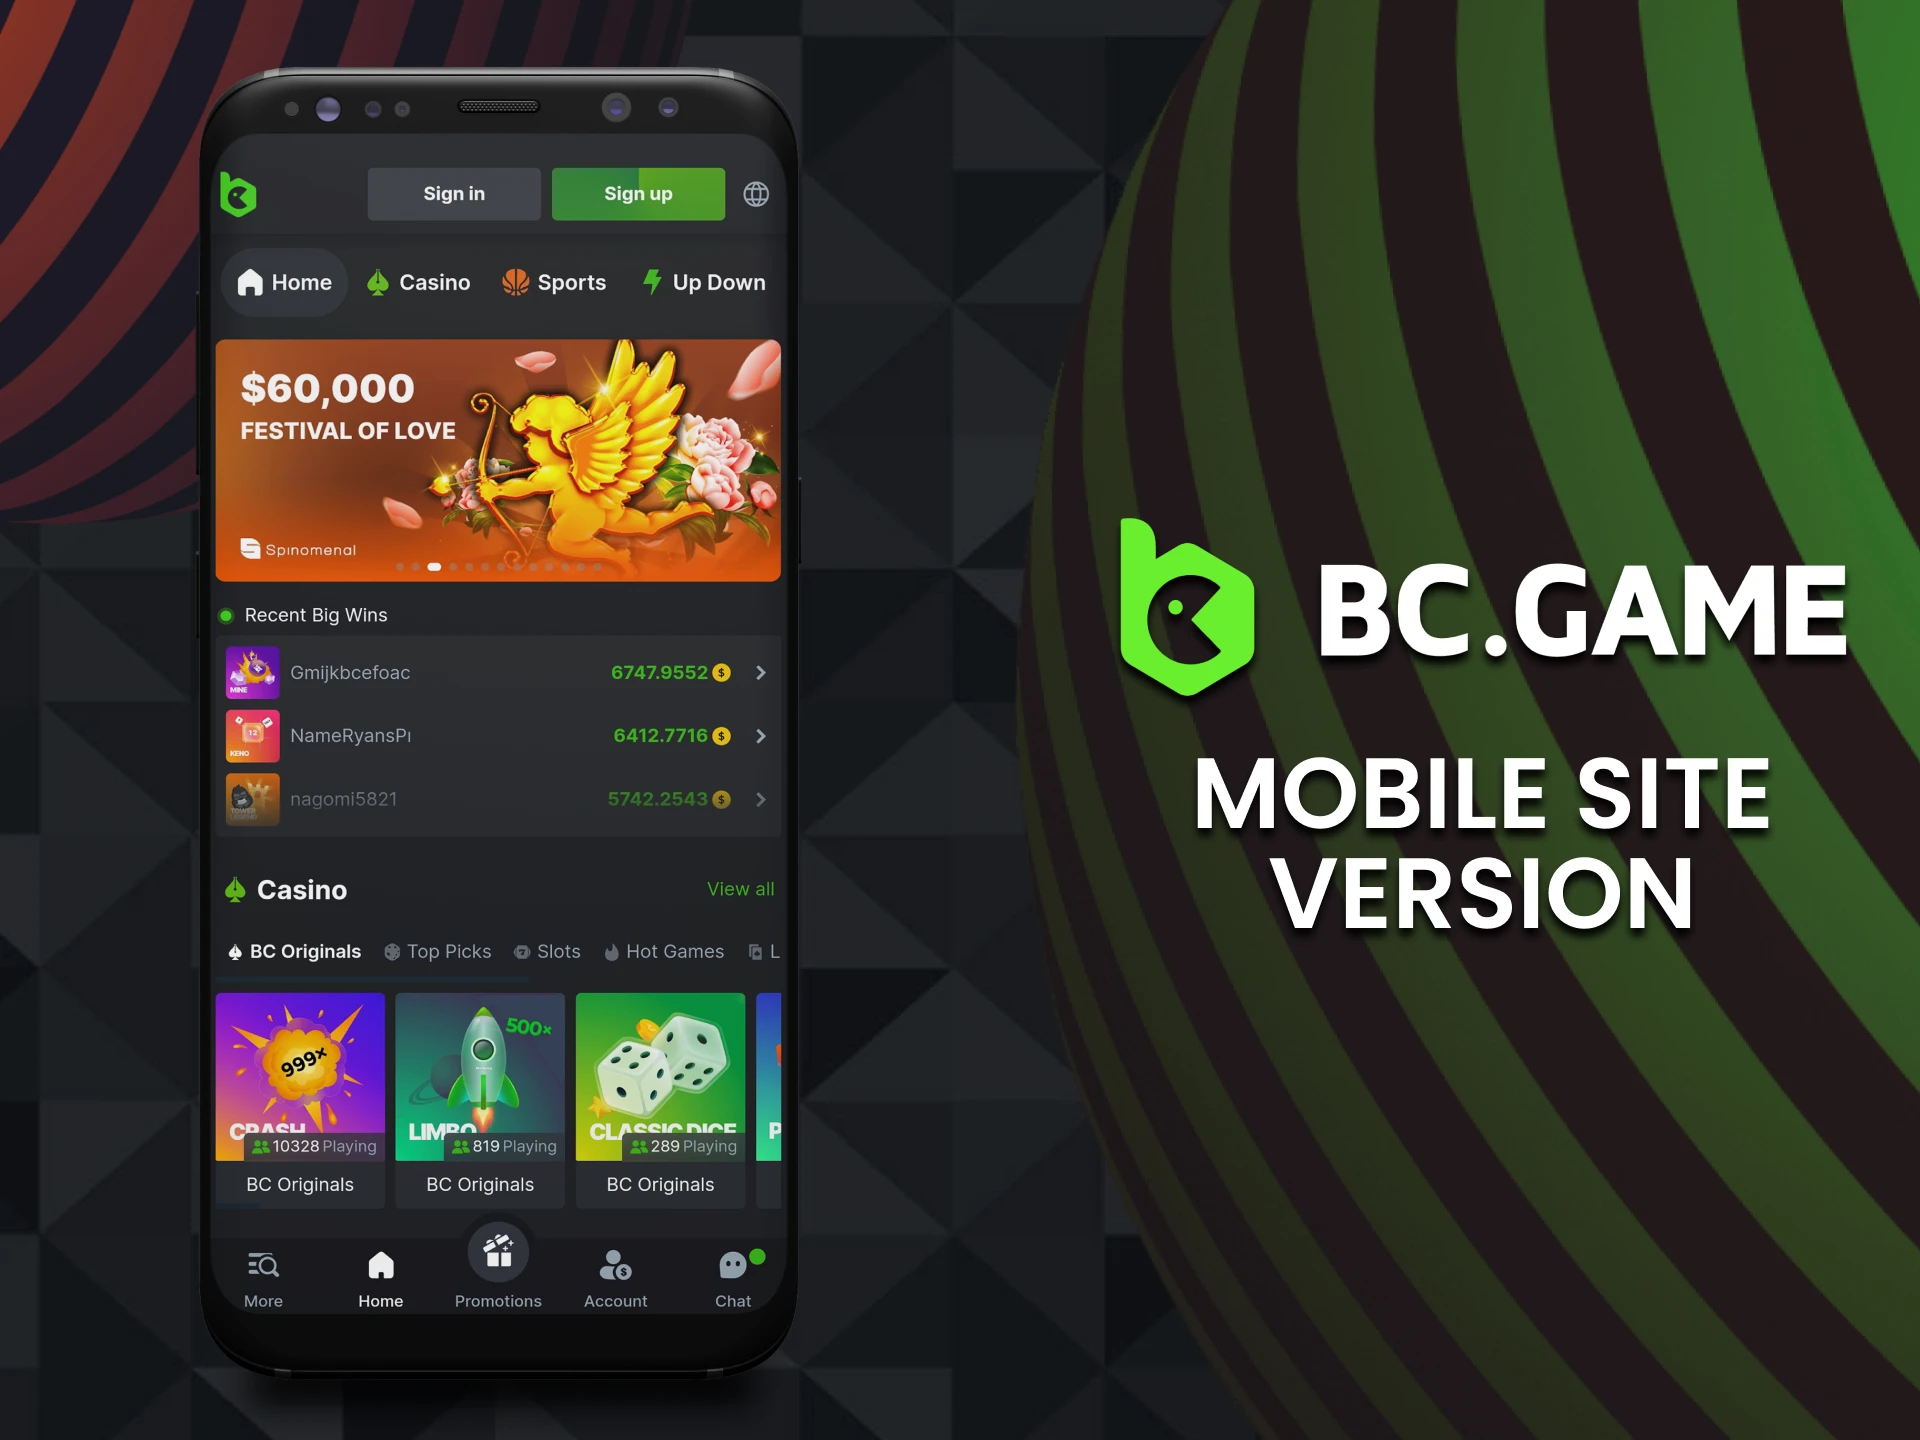 Mobile website version offers the same features as the BC Game app.